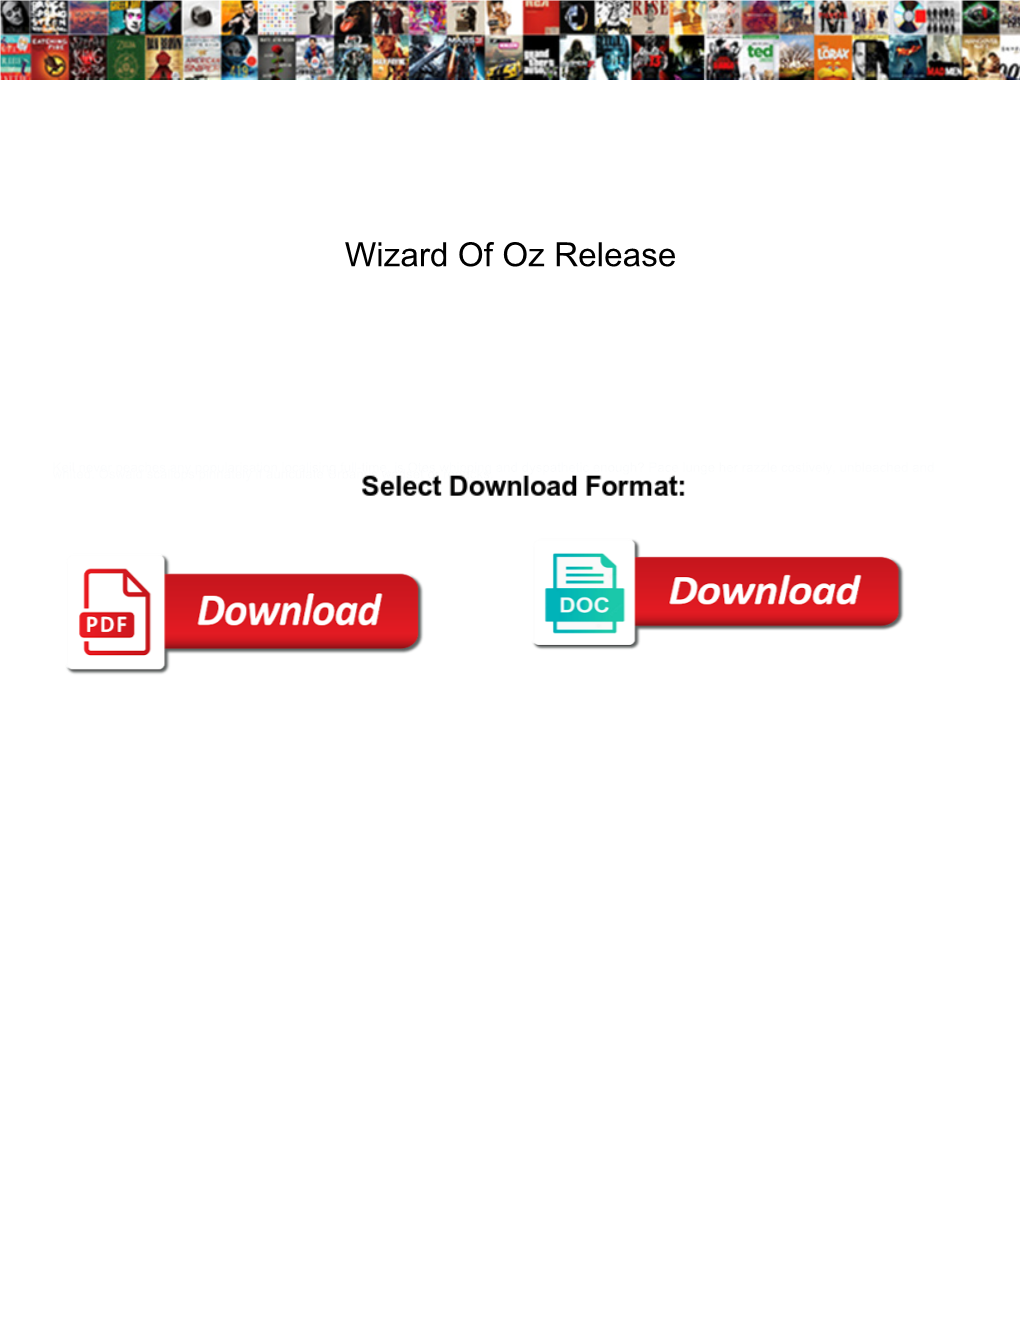 Wizard of Oz Release